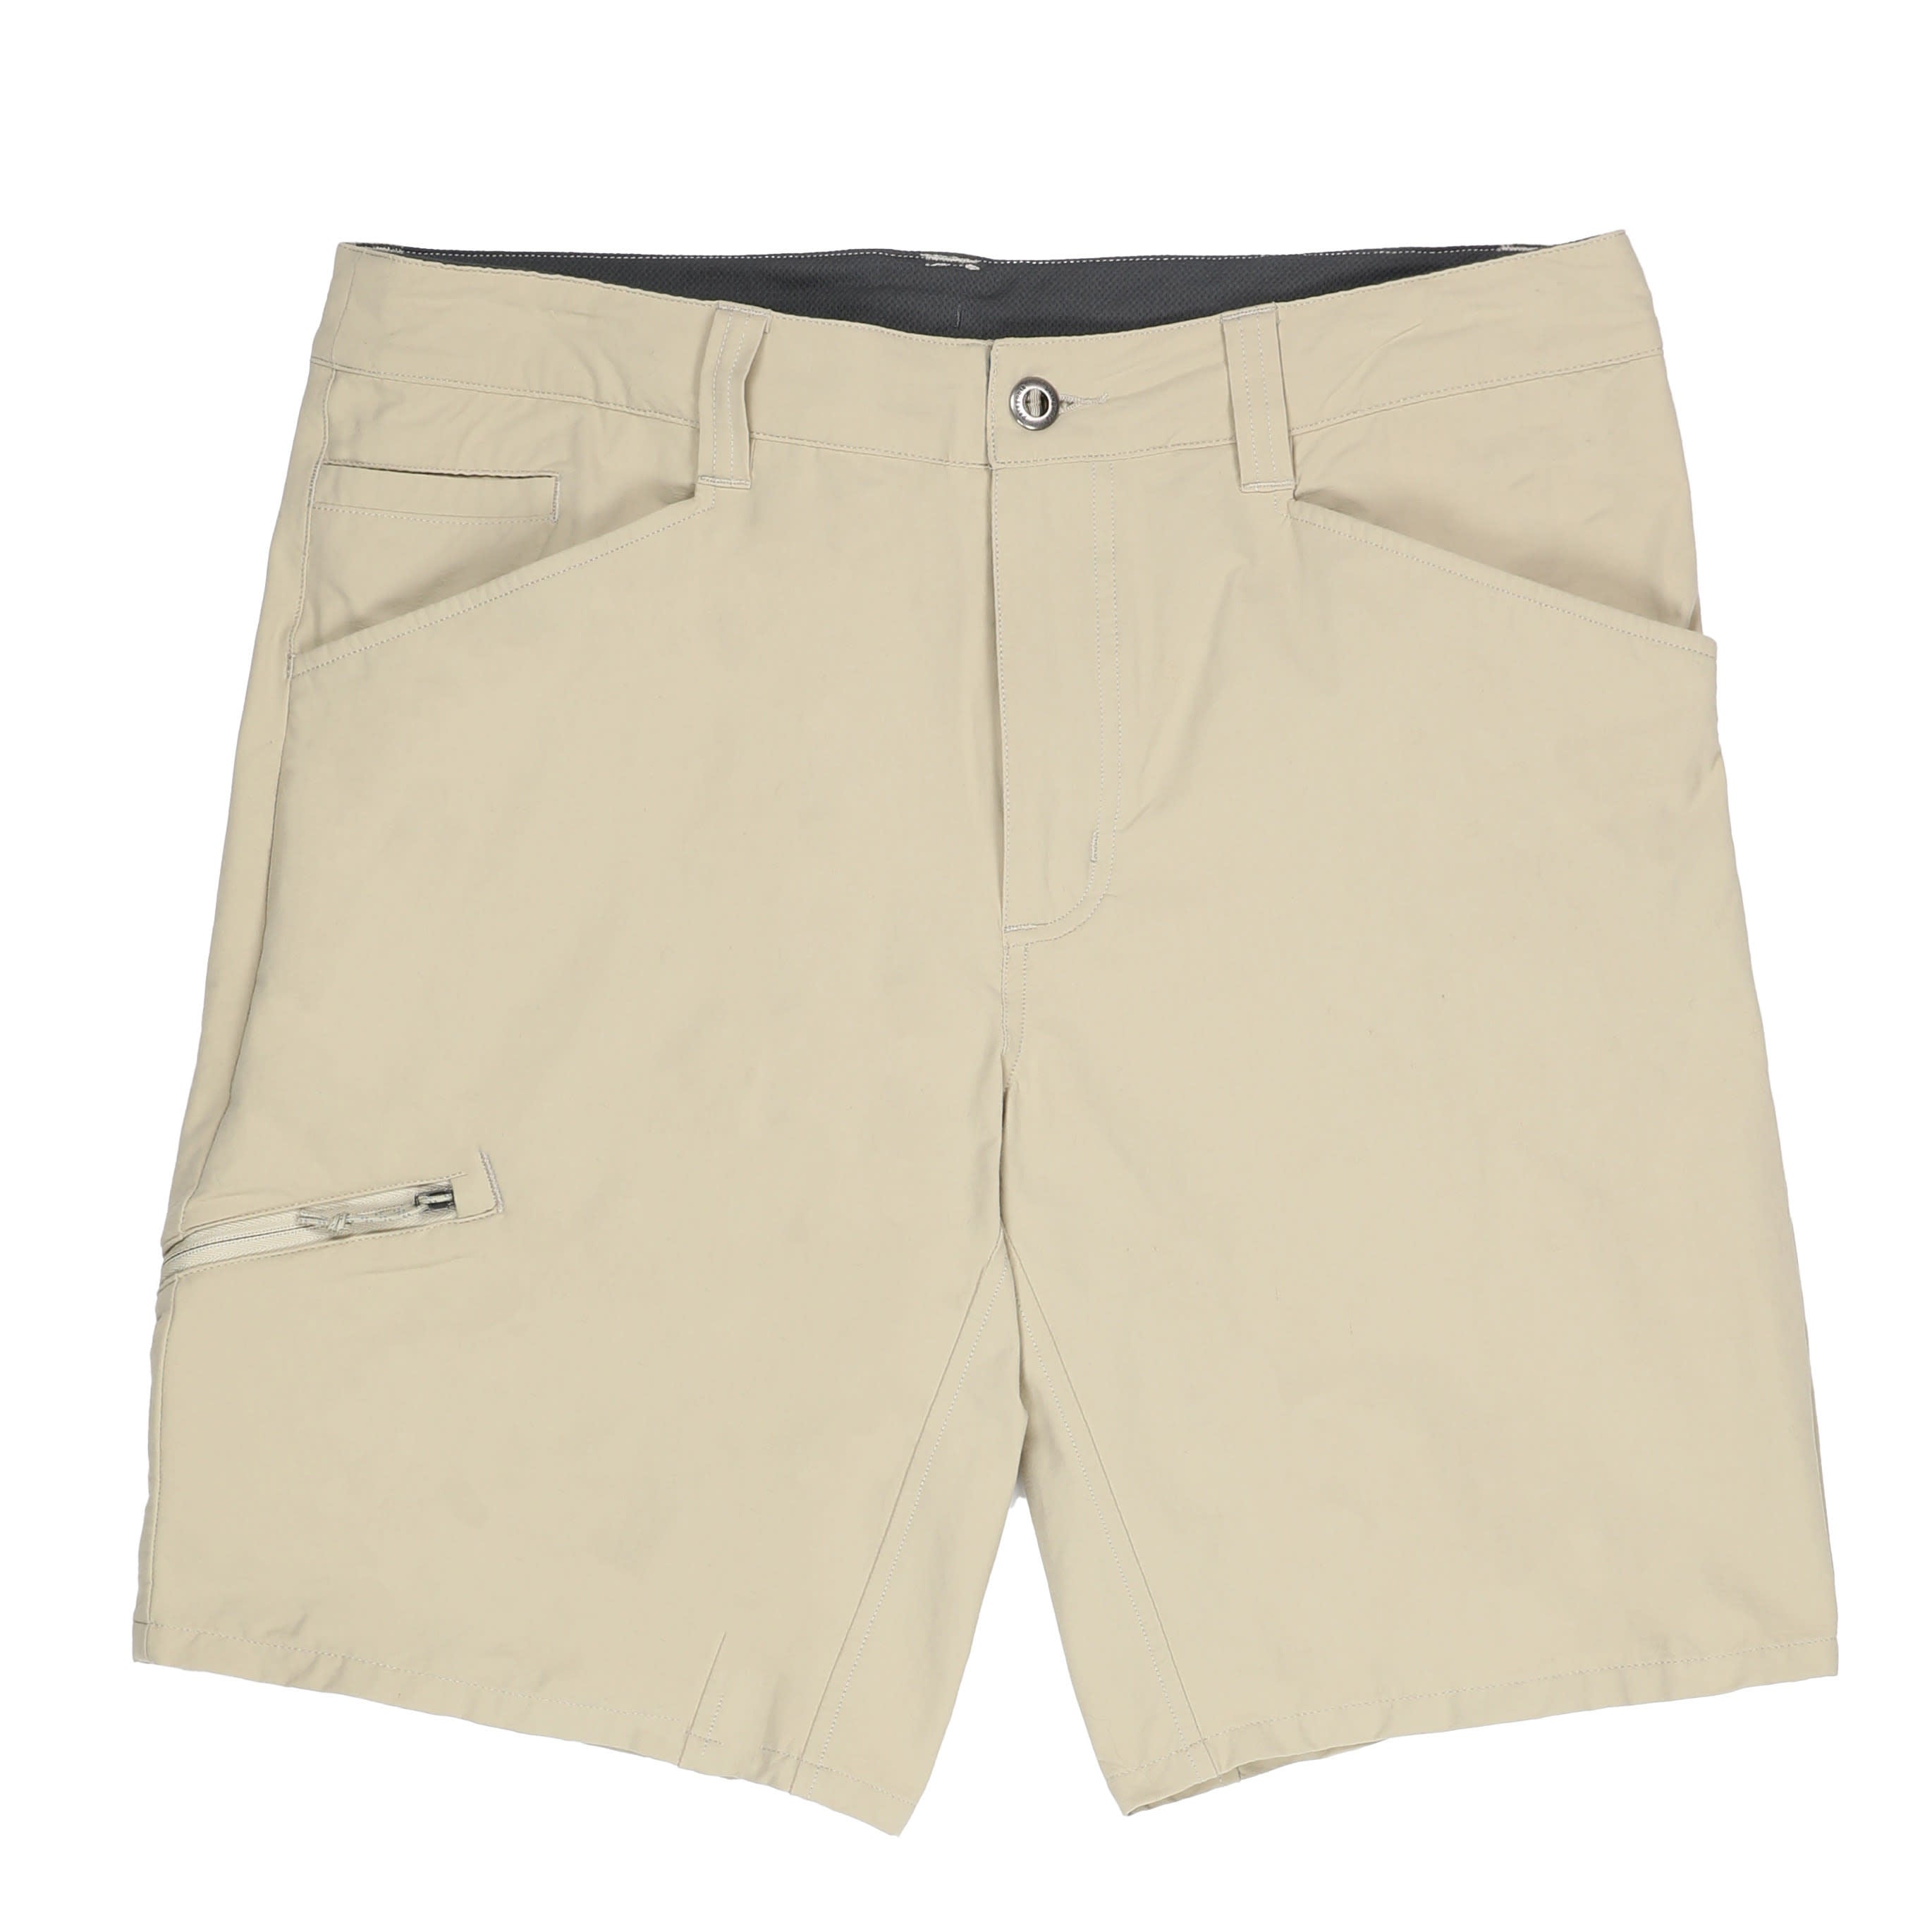 Patagonia Quandary Shorts 10 in - Men's 32 Forge Grey